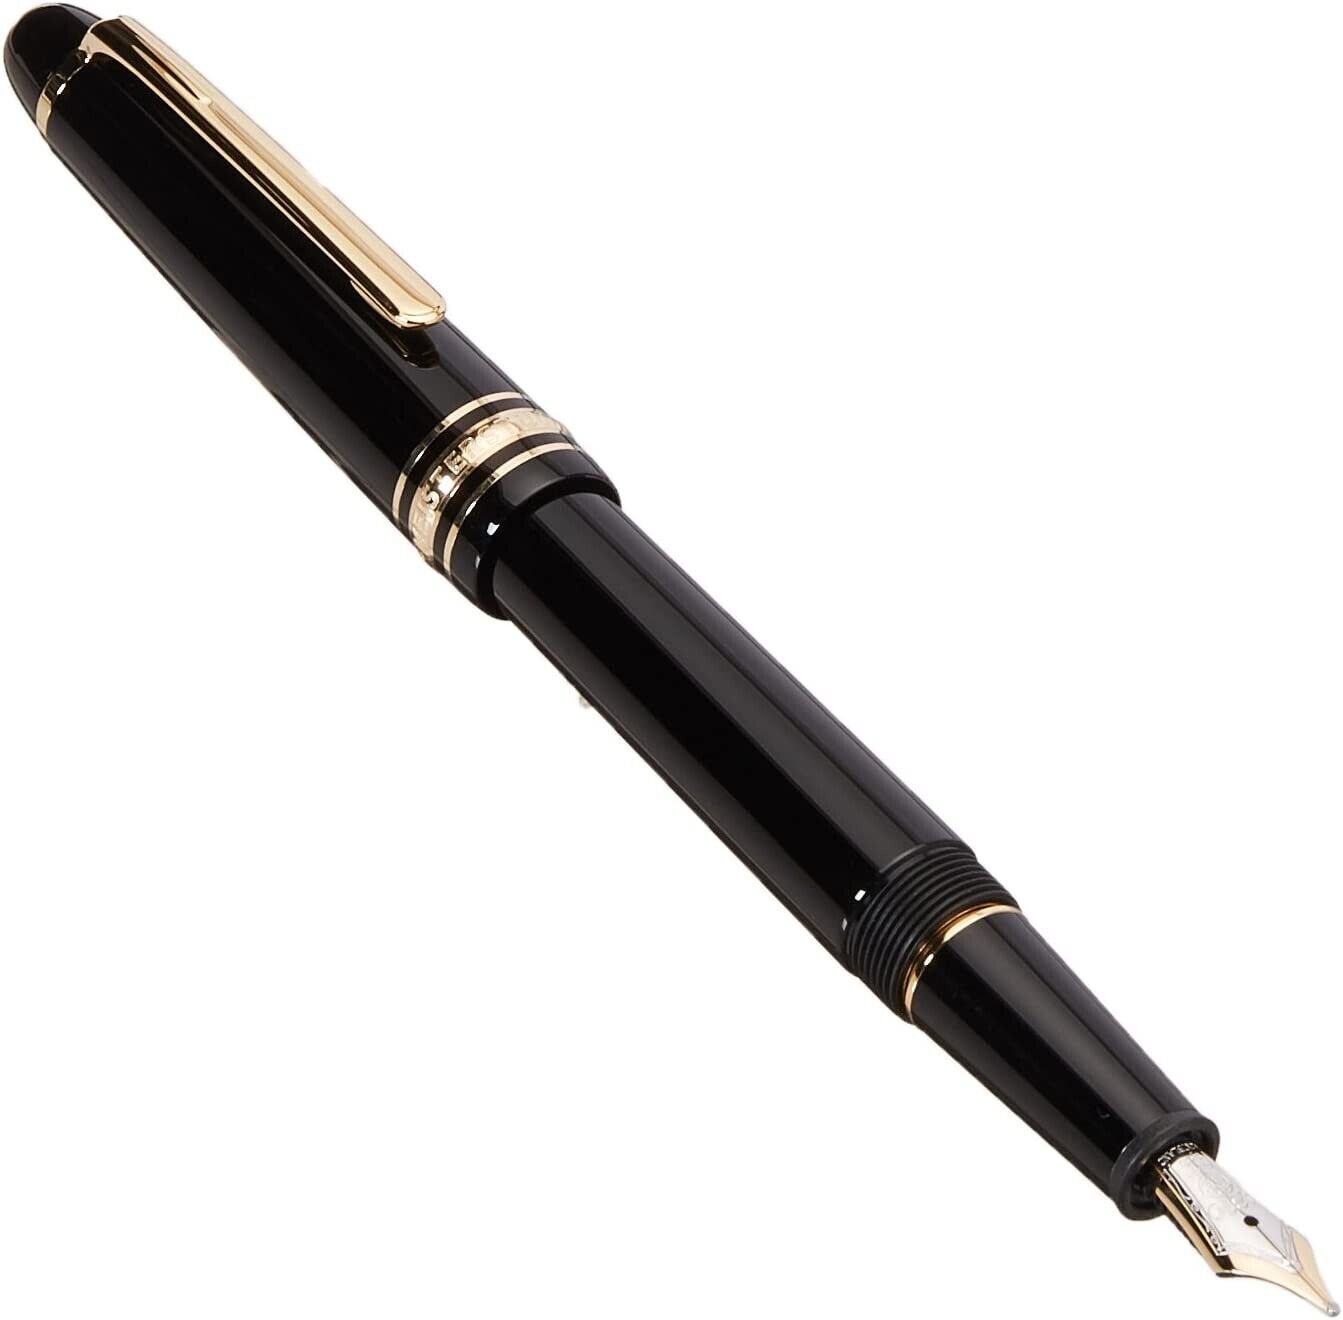 New Authentic Montblanc Meisterstück Gold Coated 145 Fountain Pen 